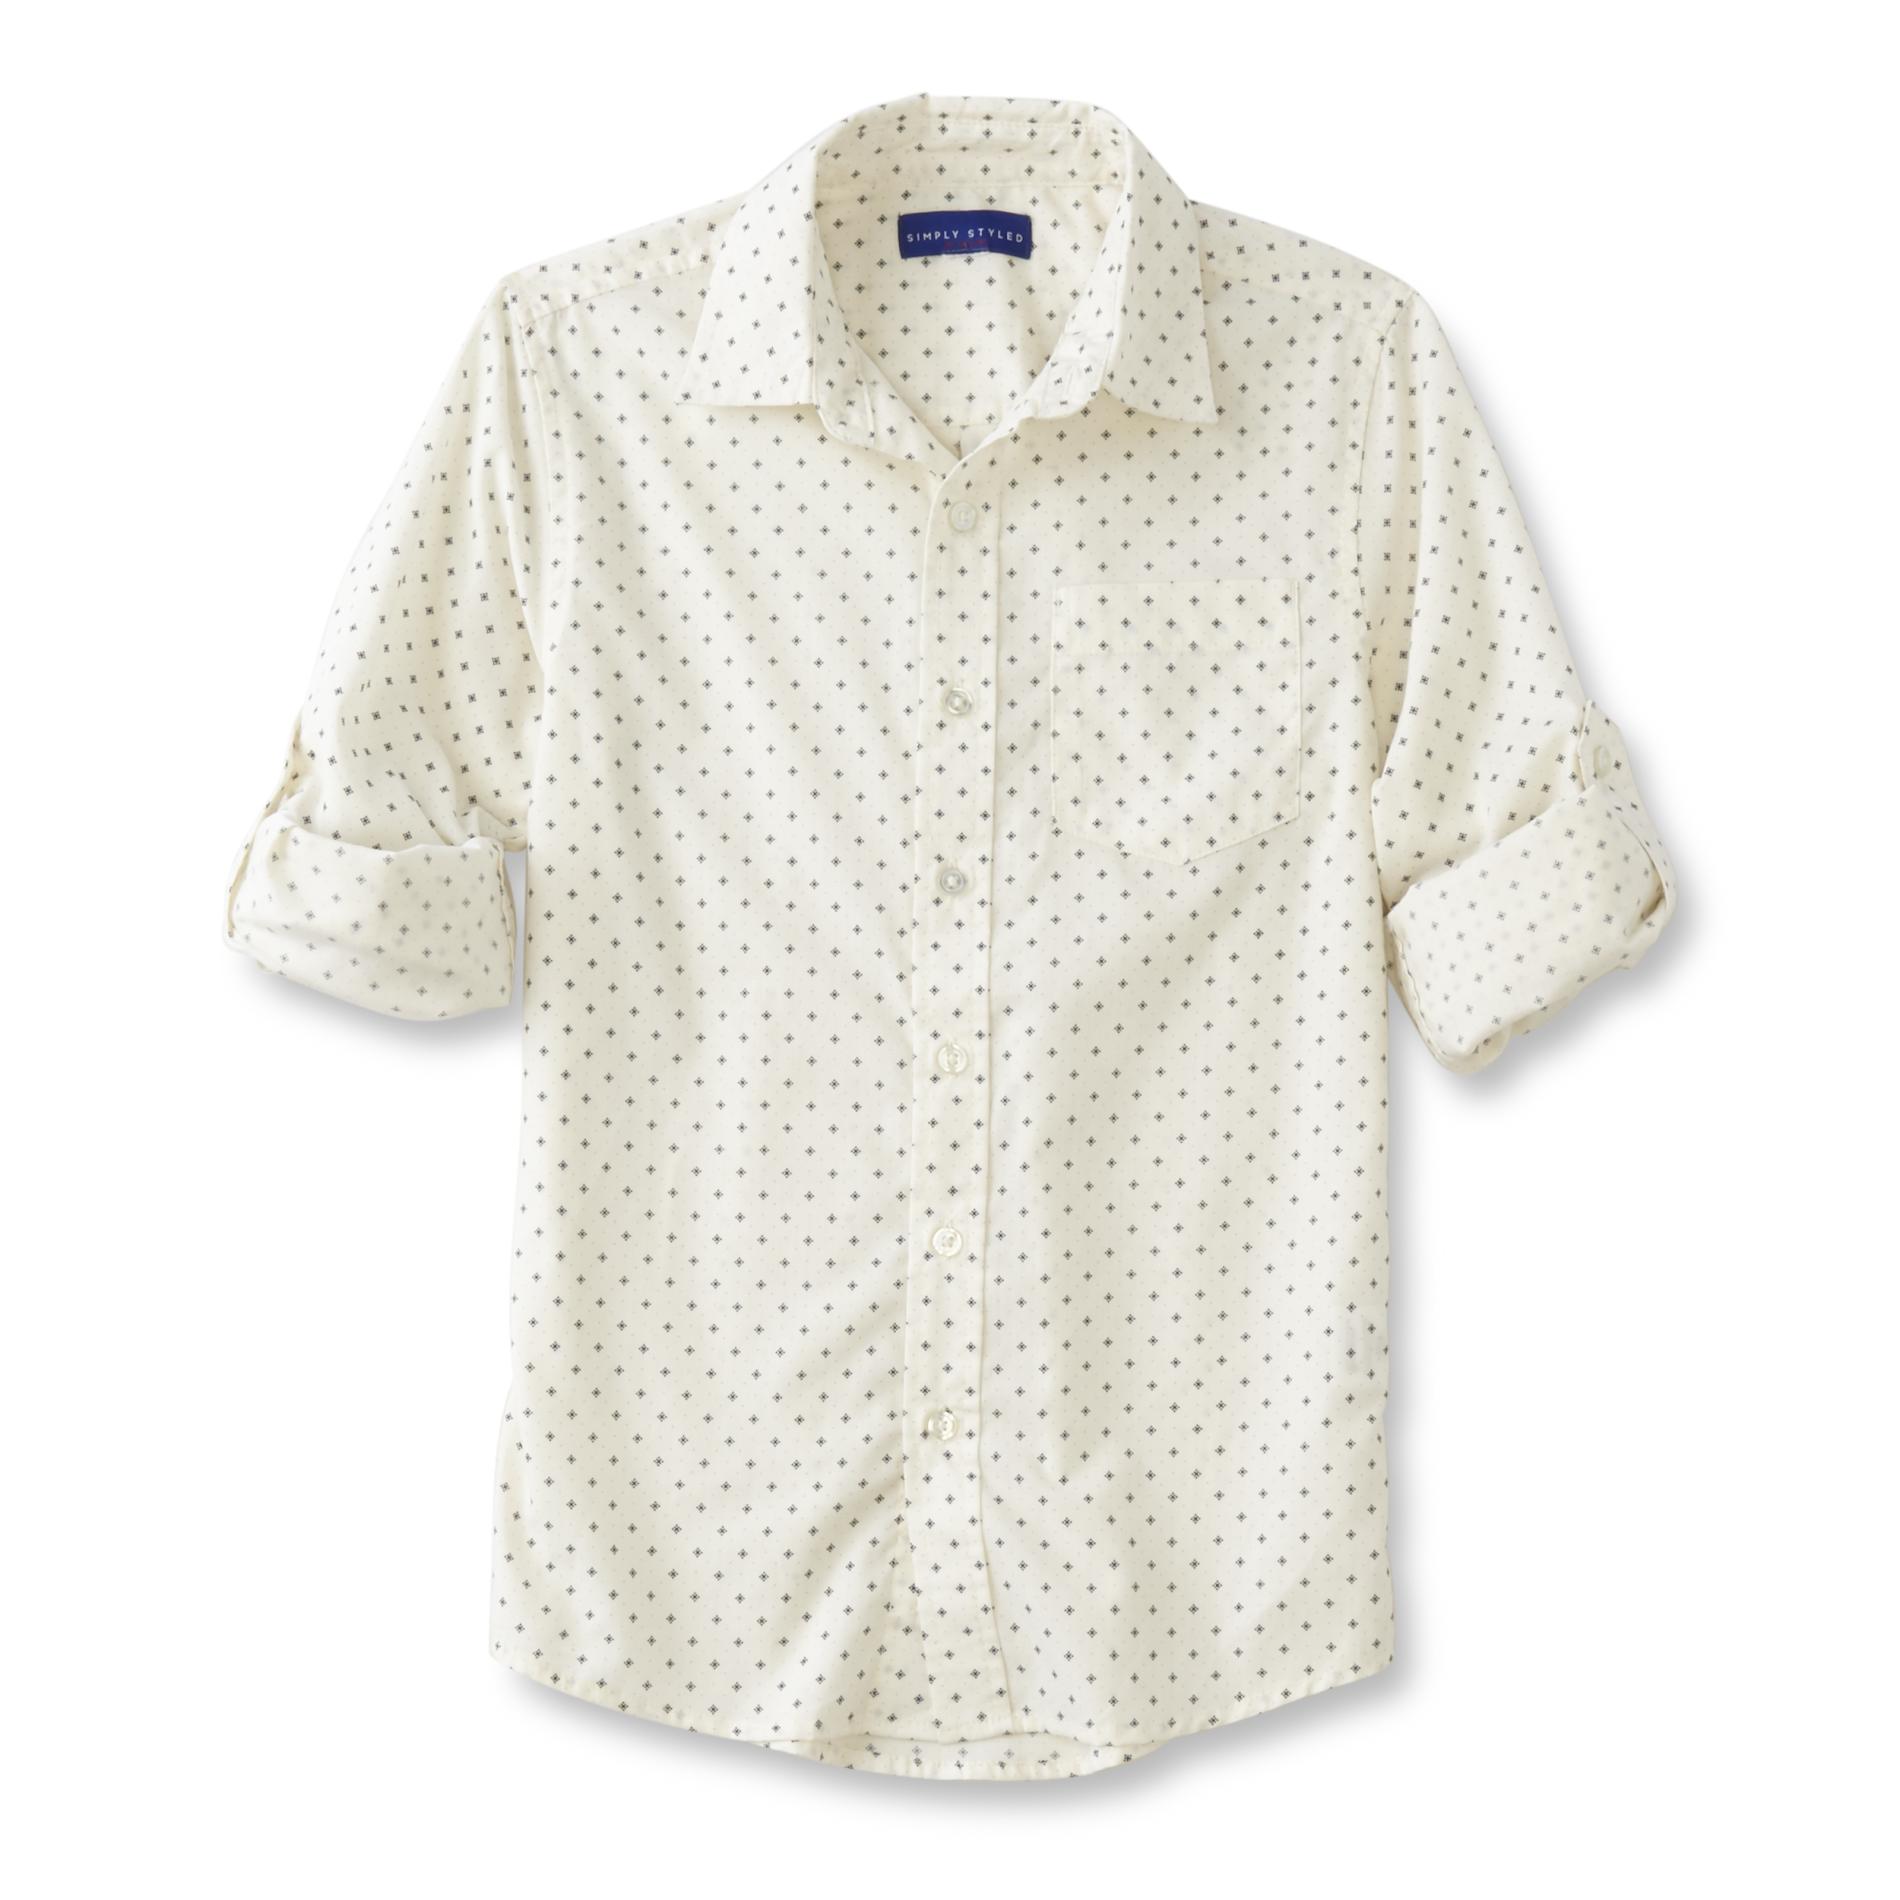 Simply Styled Boys' Button-Front Shirt - Micro Dot